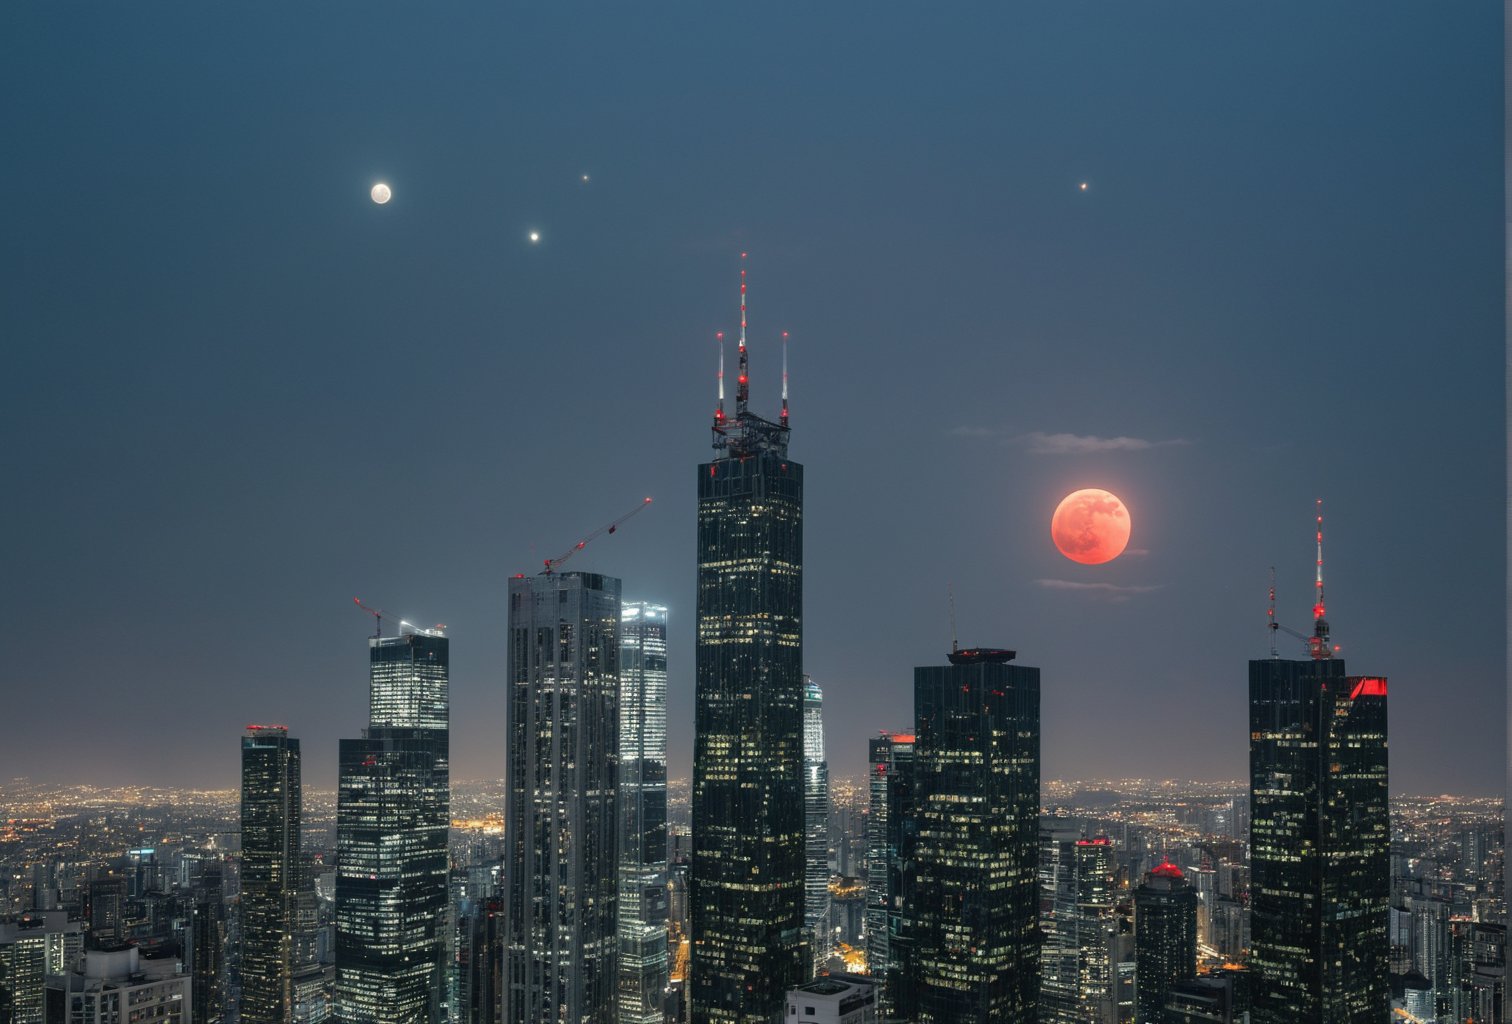 light bluish gray-light skyscrapers, sometimes with a light greenish tint, with frequent square windows, above two skyscrapers there is a red diode warning aircraft; with a dark gray sky and a clear gray sky illuminated by a bright white-blue moon